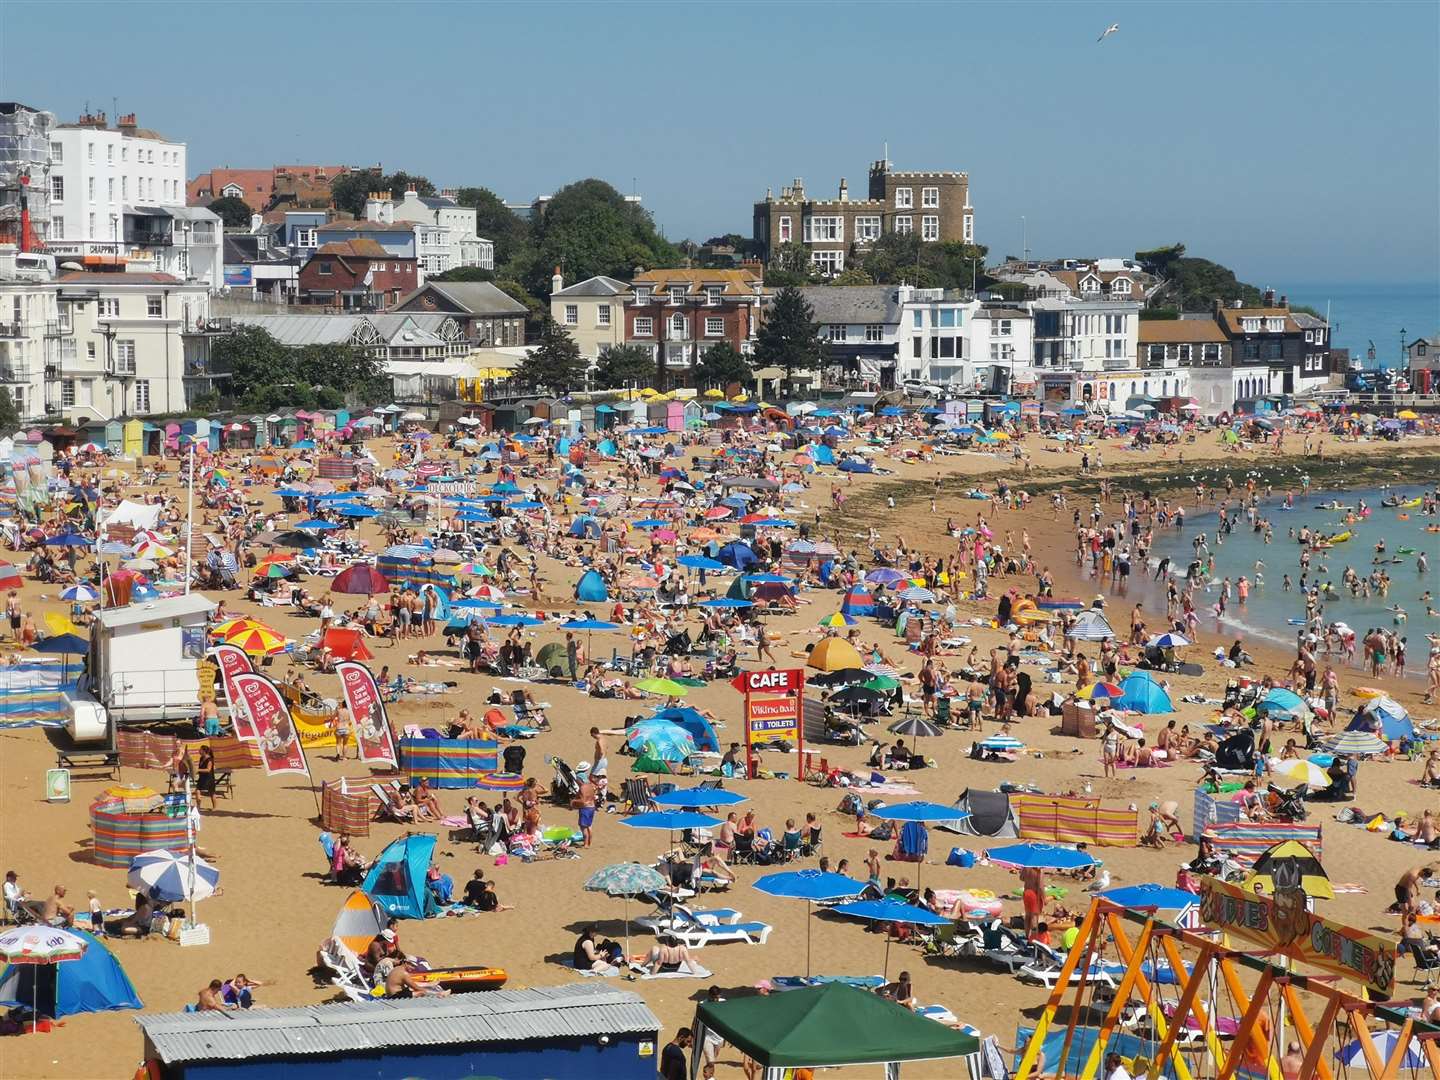 Kent is traditionally known for its beaches and countryside - but now it has become associated with something far less pleasant